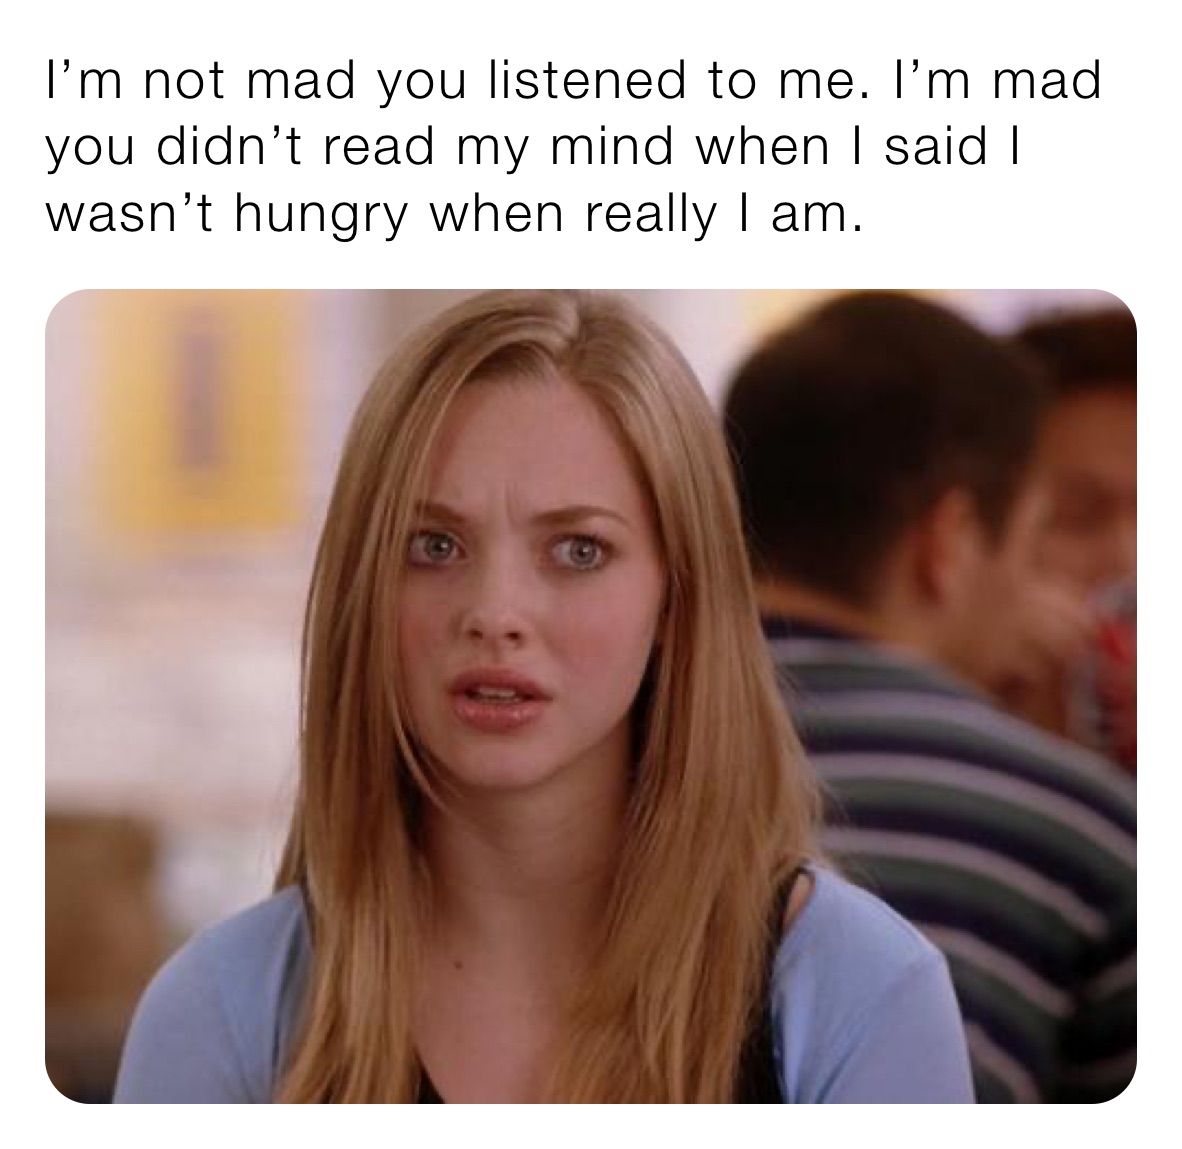 I’m not mad you listened to me. I’m mad you didn’t read my mind when I said I wasn’t hungry when really I am.